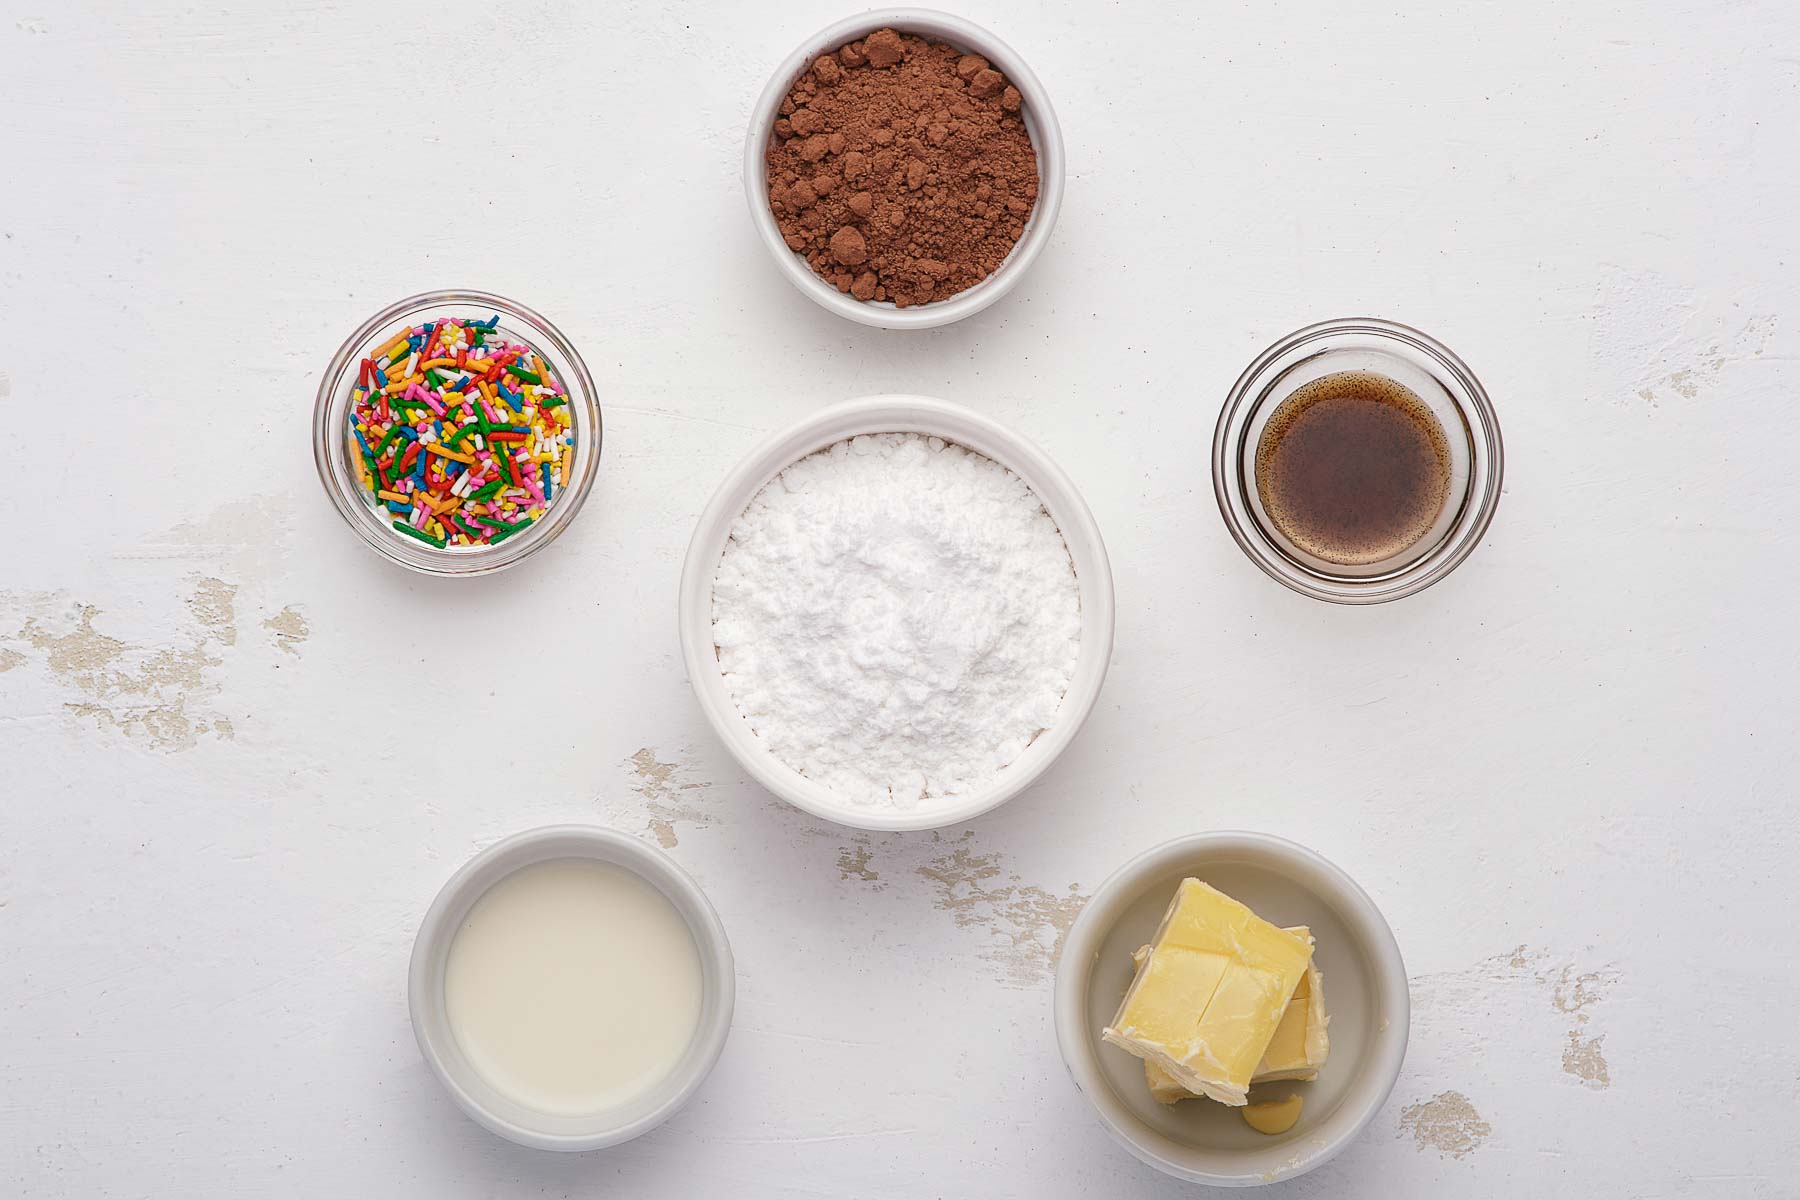 Ingredients for chocolate buttercream with sprinkles.